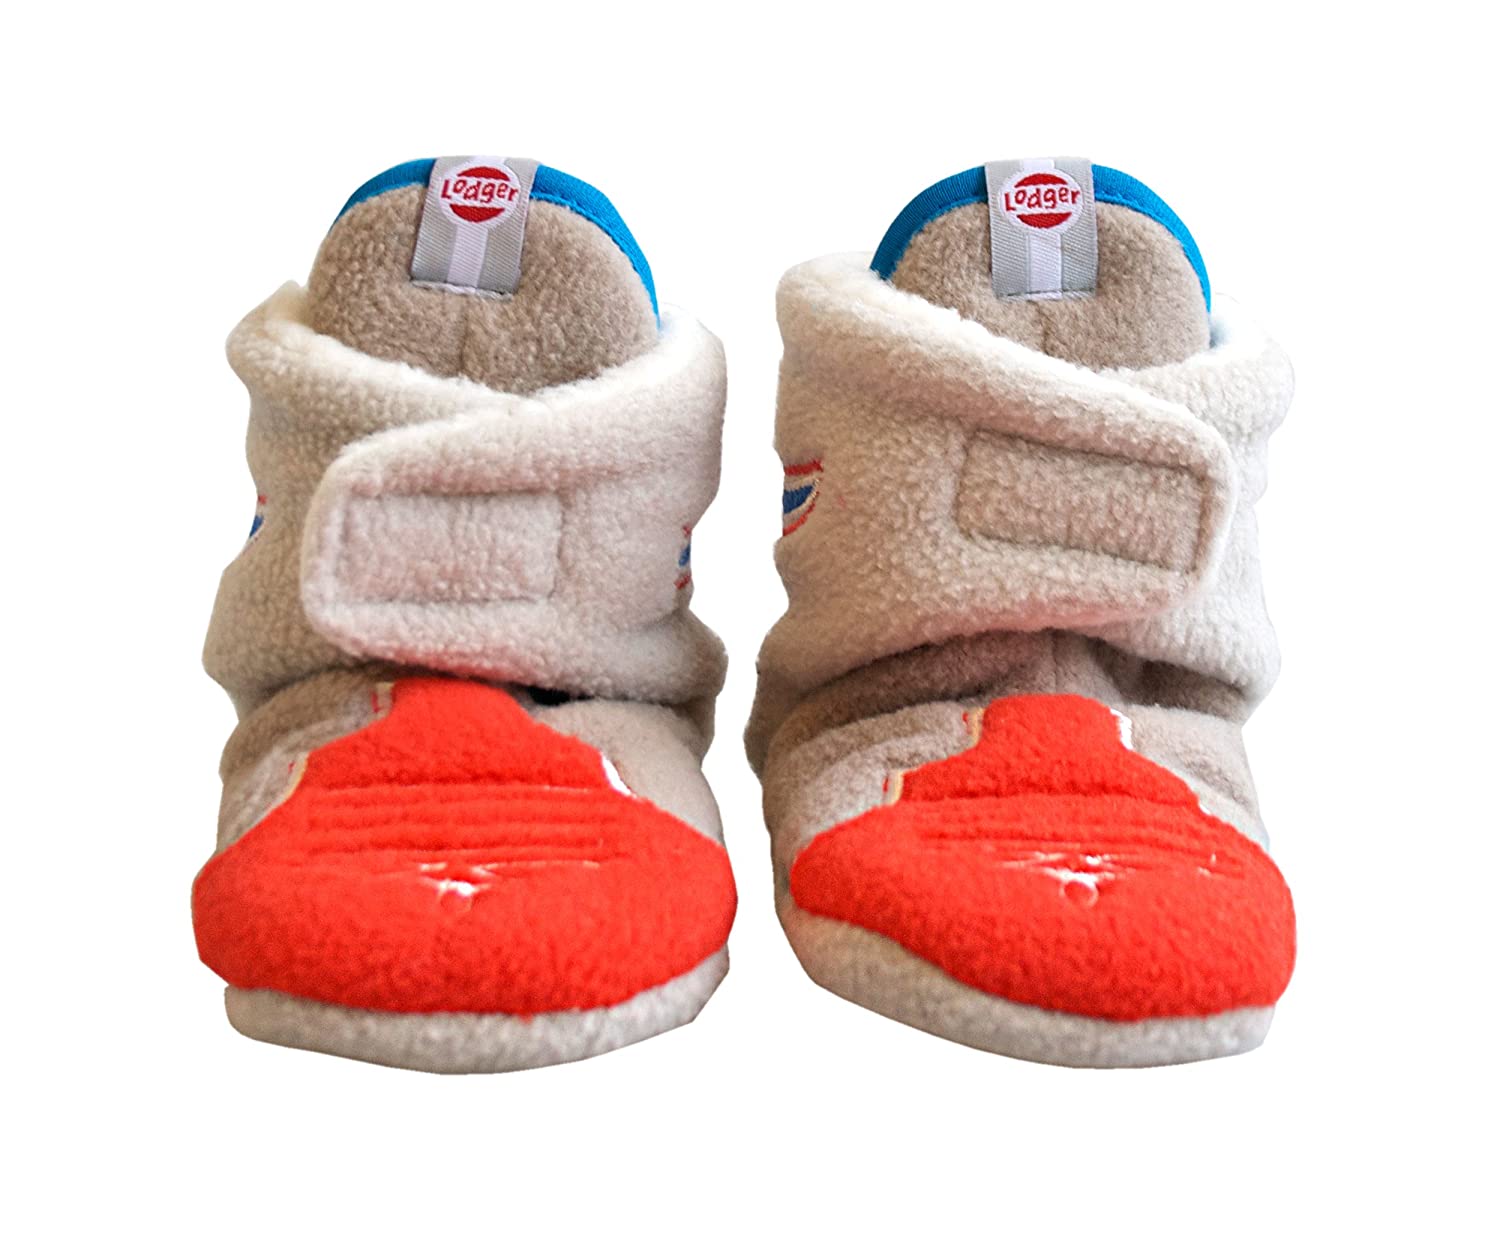 Lodger SLFF575 12- 18 M Baby Shoes Slipper Native With Anti-Slip